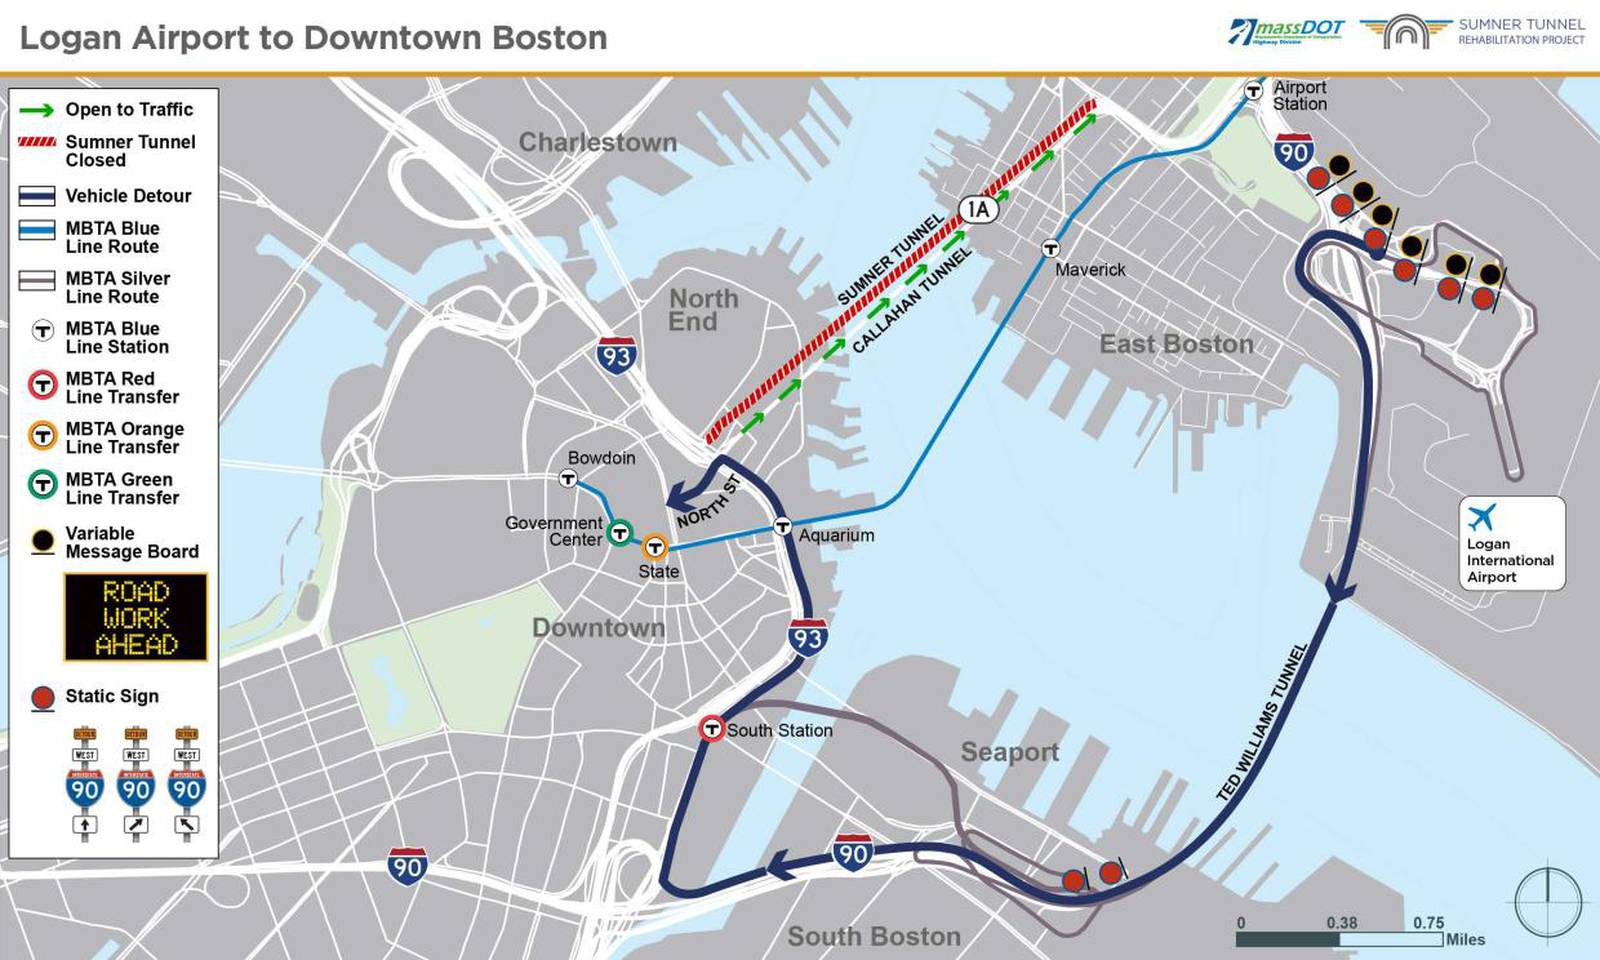 Traveling to Logan Airport? A guide to navigating detours during full